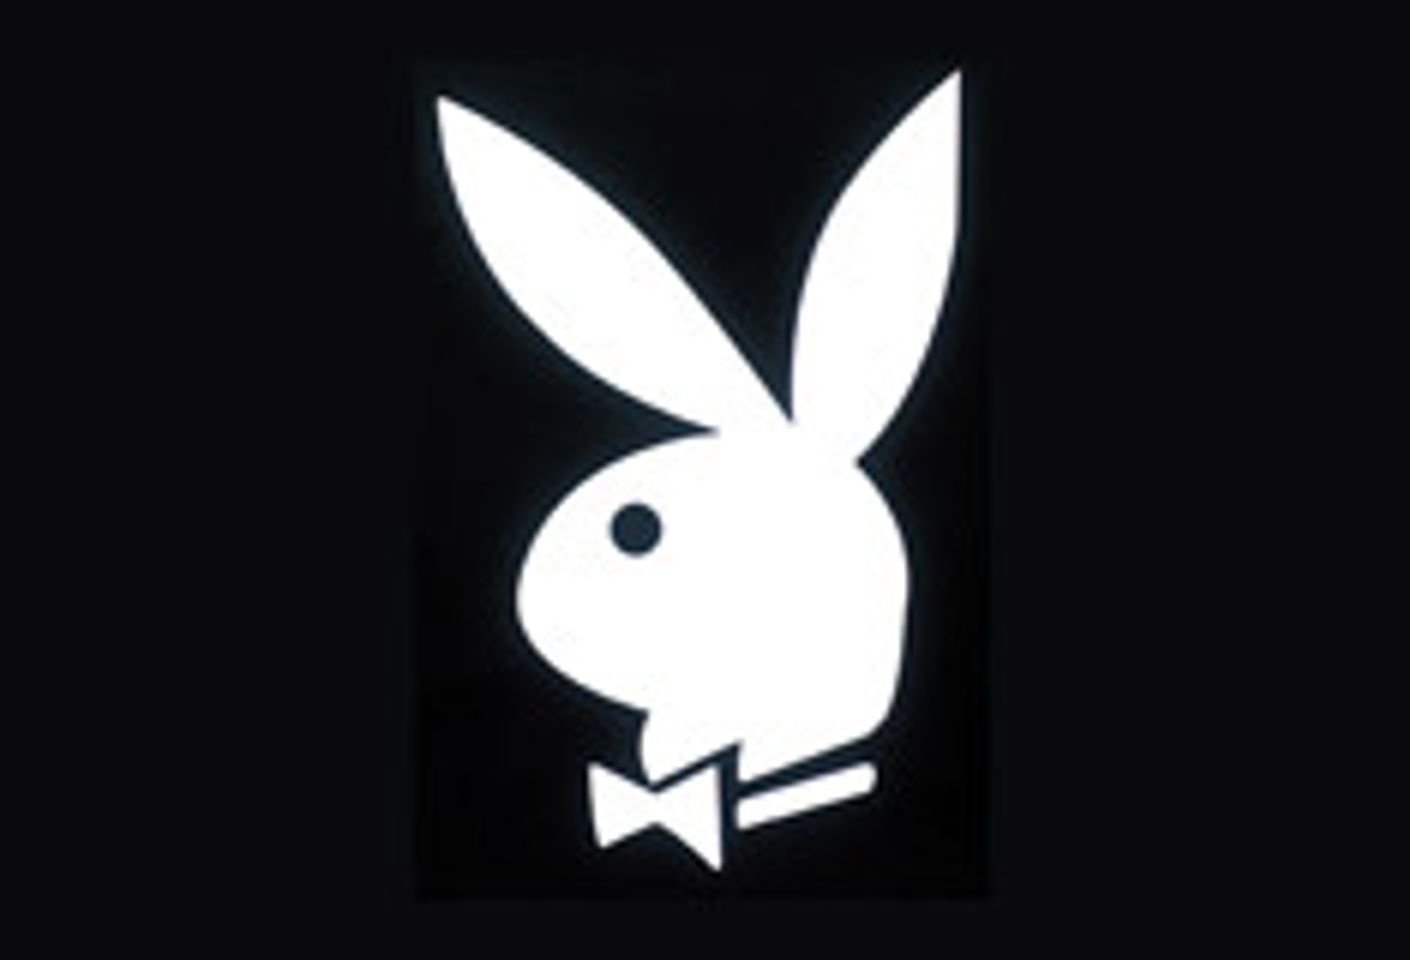 Playboy to Present at Credit Suisse&#8217;s Media Conference